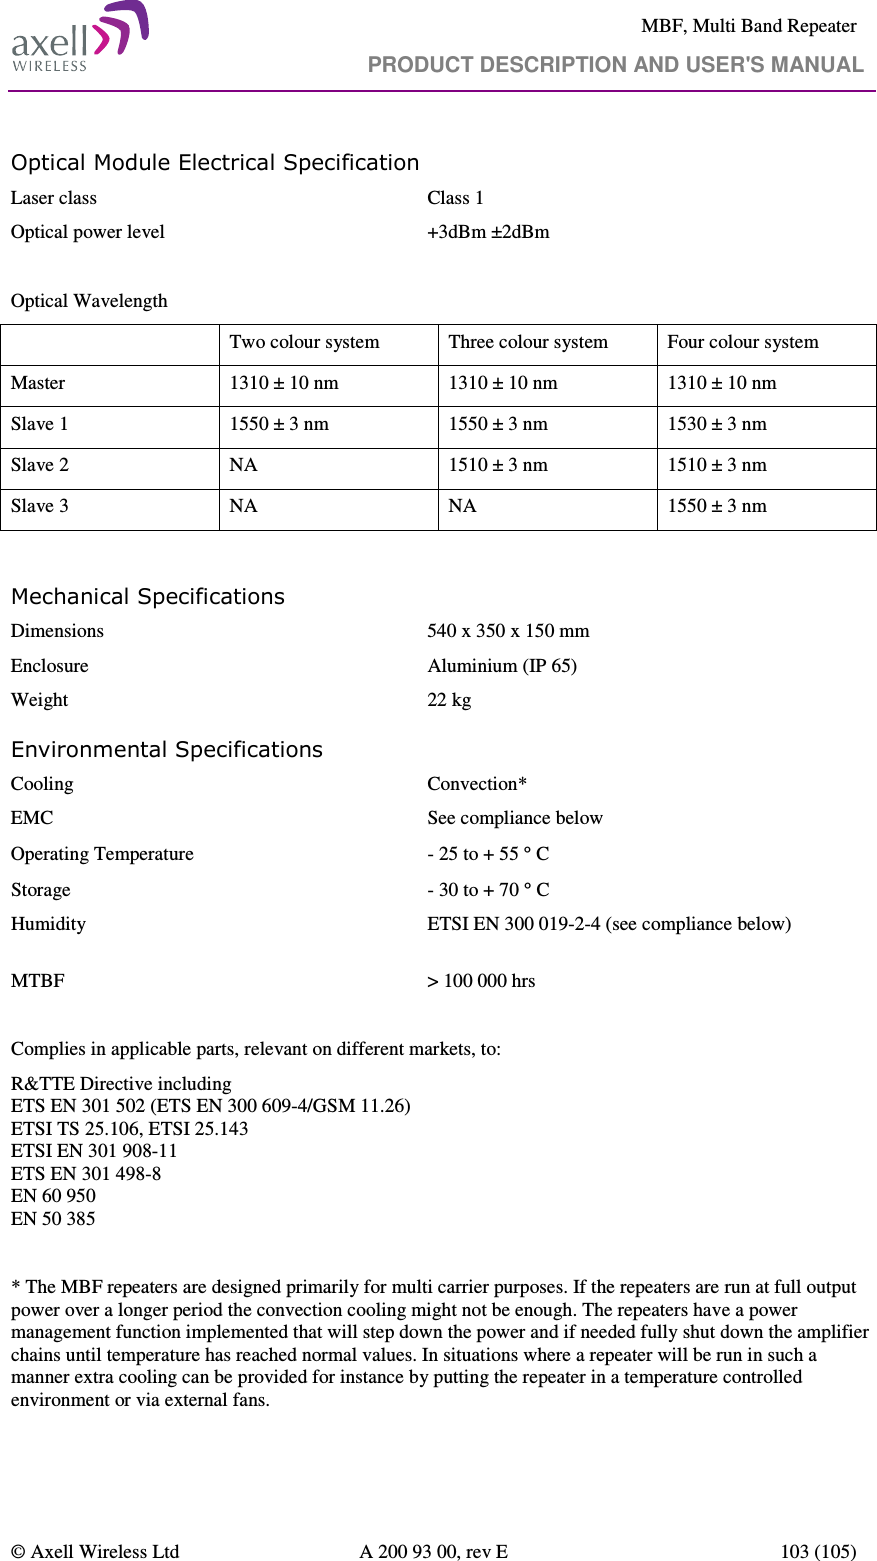     MBF, Multi Band Repeater                                     PRODUCT DESCRIPTION AND USER&apos;S MANUAL   © Axell Wireless Ltd  A 200 93 00, rev E  103 (105)  Optical Module Electrical Specification  Laser class  Class 1 Optical power level   +3dBm ±2dBm  Optical Wavelength   Two colour system  Three colour system  Four colour system Master  1310 ± 10 nm  1310 ± 10 nm  1310 ± 10 nm Slave 1  1550 ± 3 nm  1550 ± 3 nm  1530 ± 3 nm Slave 2  NA  1510 ± 3 nm  1510 ± 3 nm Slave 3  NA  NA  1550 ± 3 nm     Mechanical Specifications Dimensions   540 x 350 x 150 mm Enclosure  Aluminium (IP 65) Weight   22 kg Environmental Specifications Cooling  Convection* EMC   See compliance below  Operating Temperature  - 25 to + 55 ° C Storage   - 30 to + 70 ° C Humidity  ETSI EN 300 019-2-4 (see compliance below)      MTBF   &gt; 100 000 hrs  Complies in applicable parts, relevant on different markets, to: R&amp;TTE Directive including ETS EN 301 502 (ETS EN 300 609-4/GSM 11.26) ETSI TS 25.106, ETSI 25.143 ETSI EN 301 908-11 ETS EN 301 498-8 EN 60 950 EN 50 385  * The MBF repeaters are designed primarily for multi carrier purposes. If the repeaters are run at full output power over a longer period the convection cooling might not be enough. The repeaters have a power management function implemented that will step down the power and if needed fully shut down the amplifier chains until temperature has reached normal values. In situations where a repeater will be run in such a manner extra cooling can be provided for instance by putting the repeater in a temperature controlled environment or via external fans. 